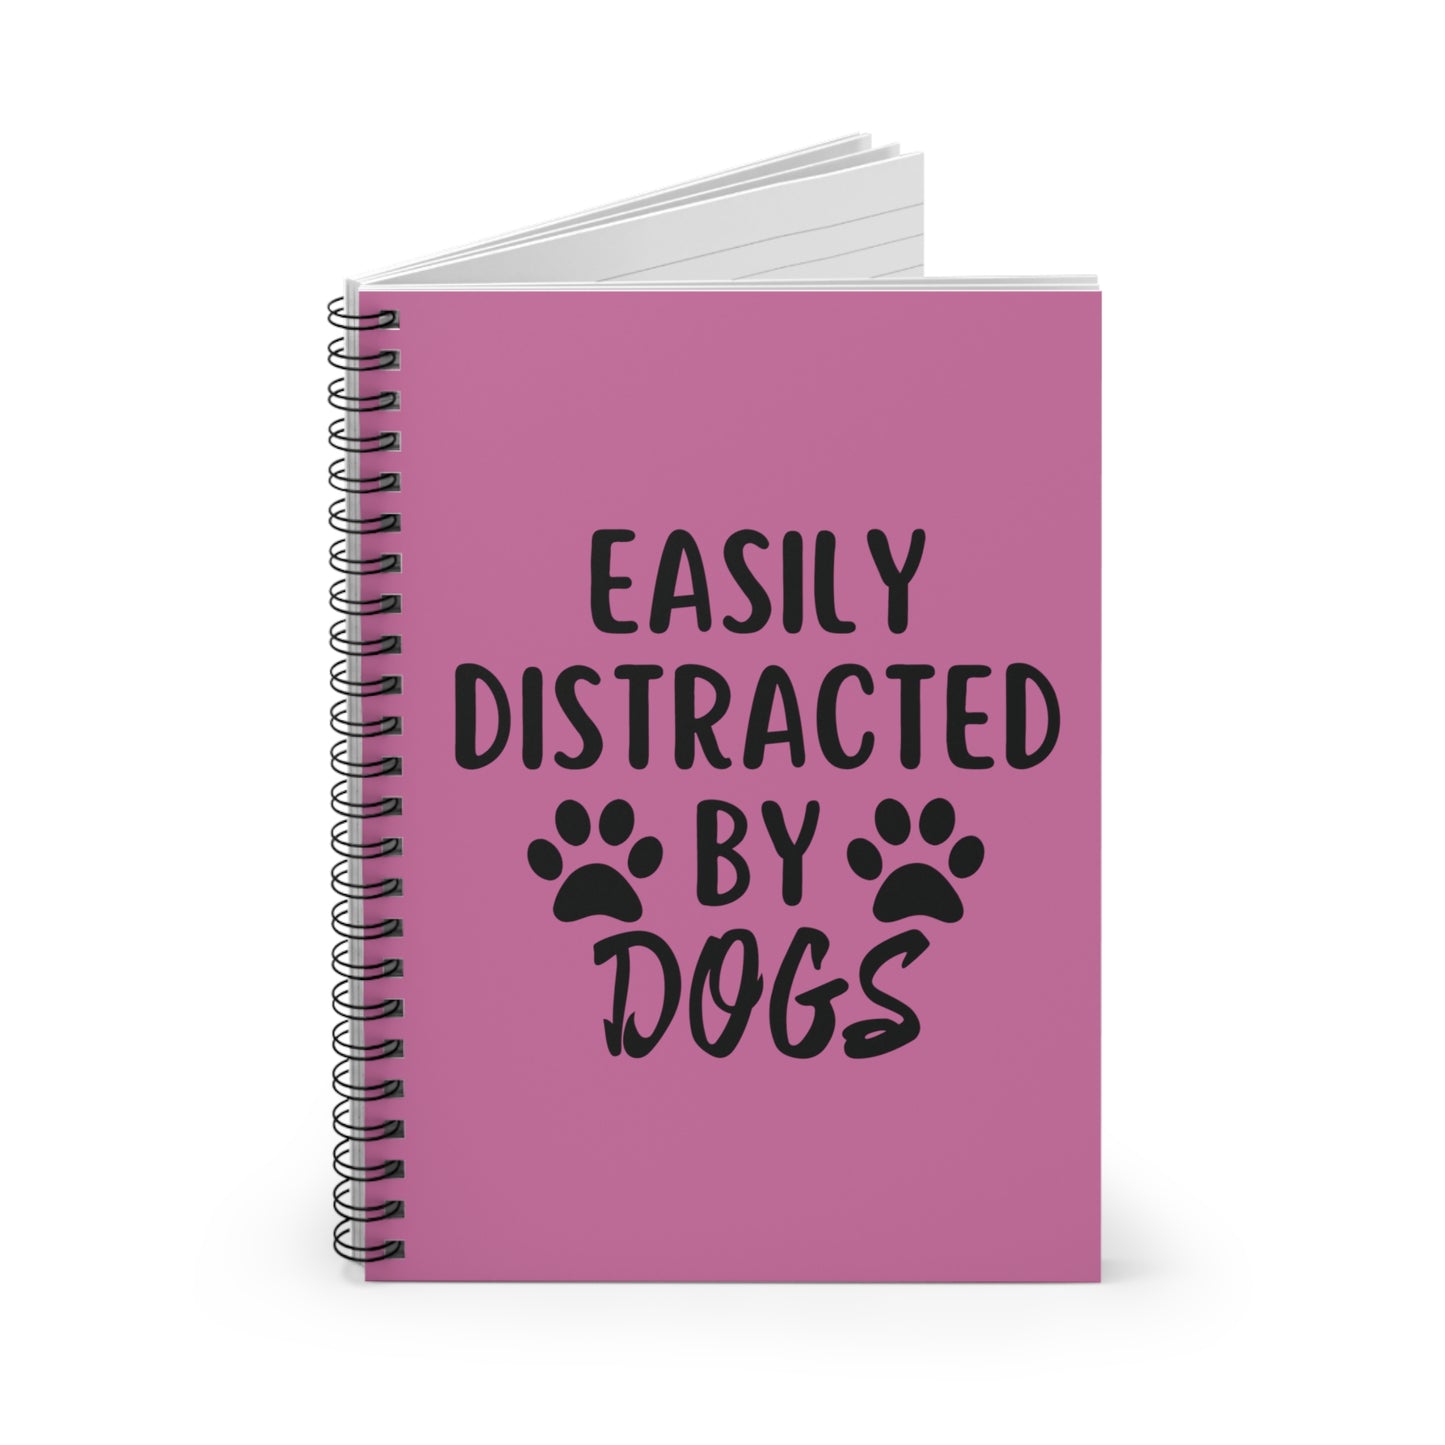 Easily Distracted By Dogs - Spiral Notebook - Ruled Line